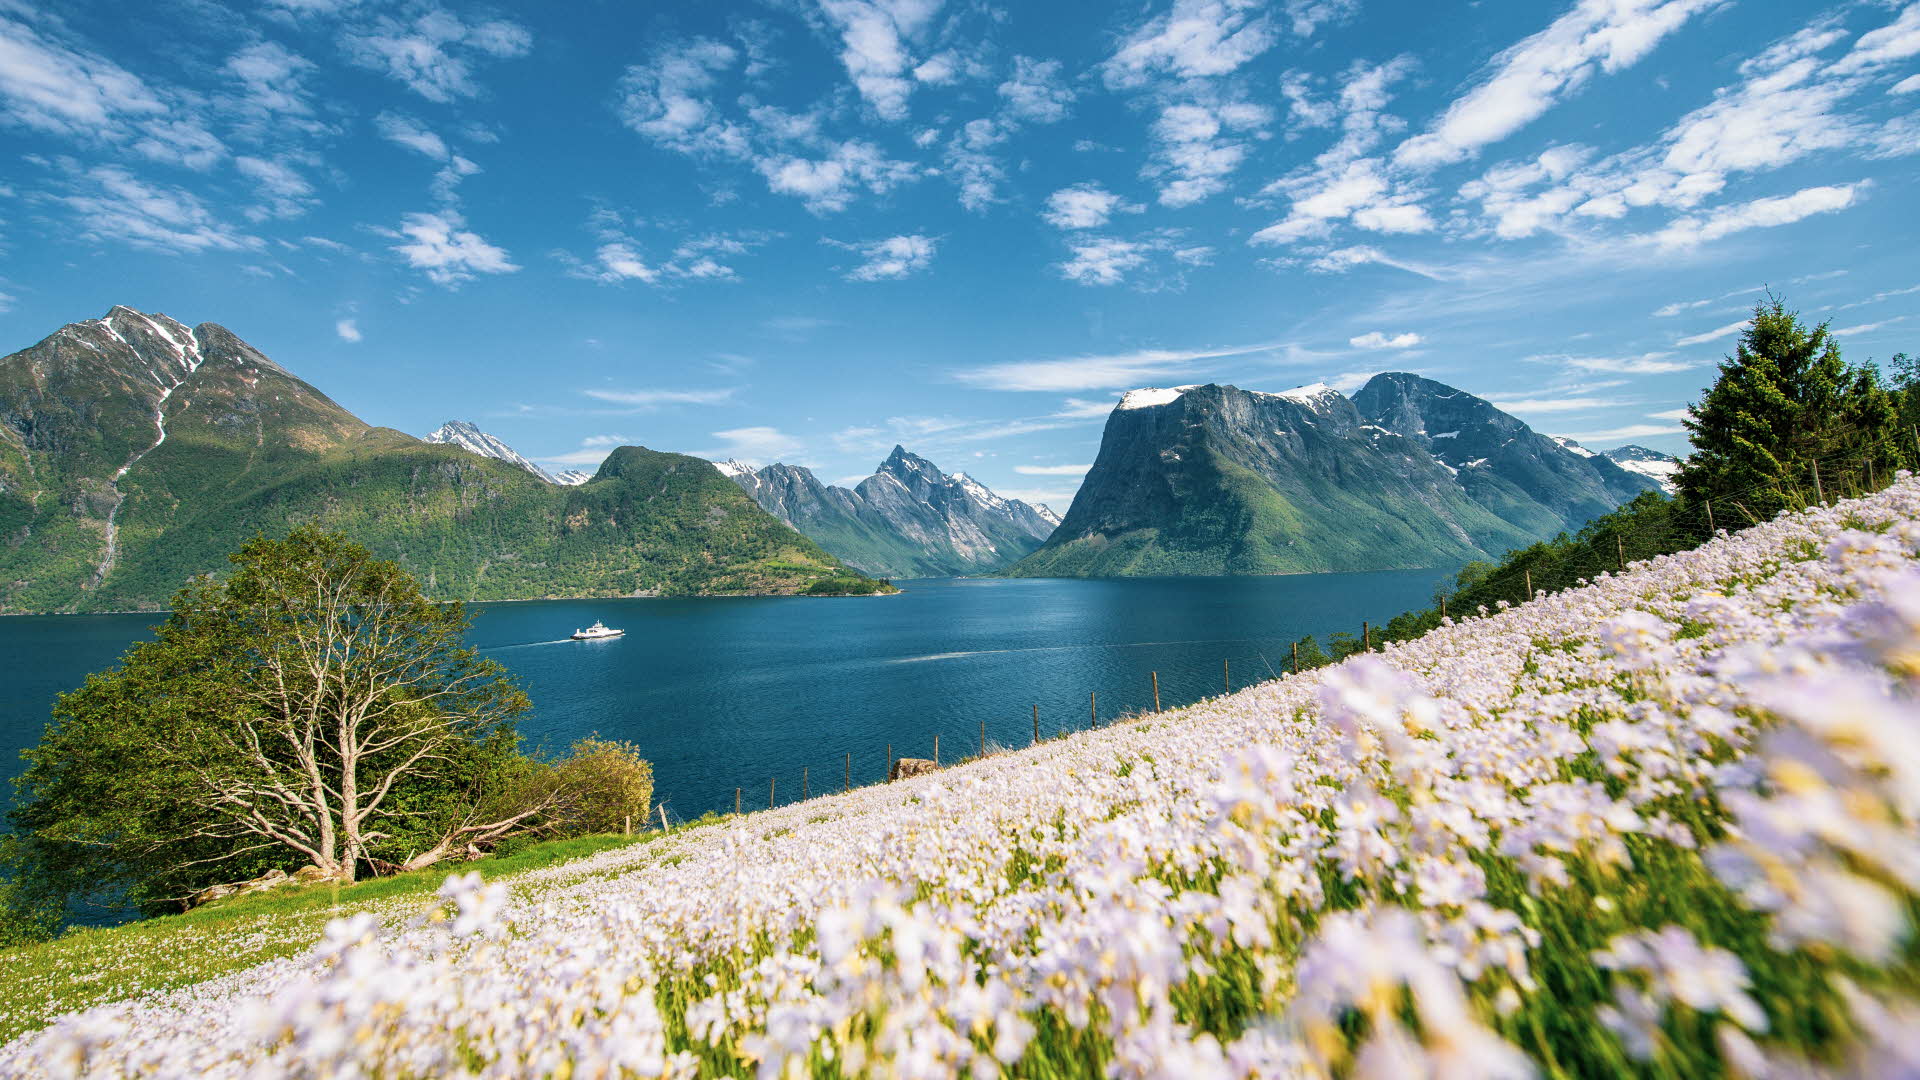 The Hjørundfjord and the Sunnmørsalpene range, viewed from a flowery meadow